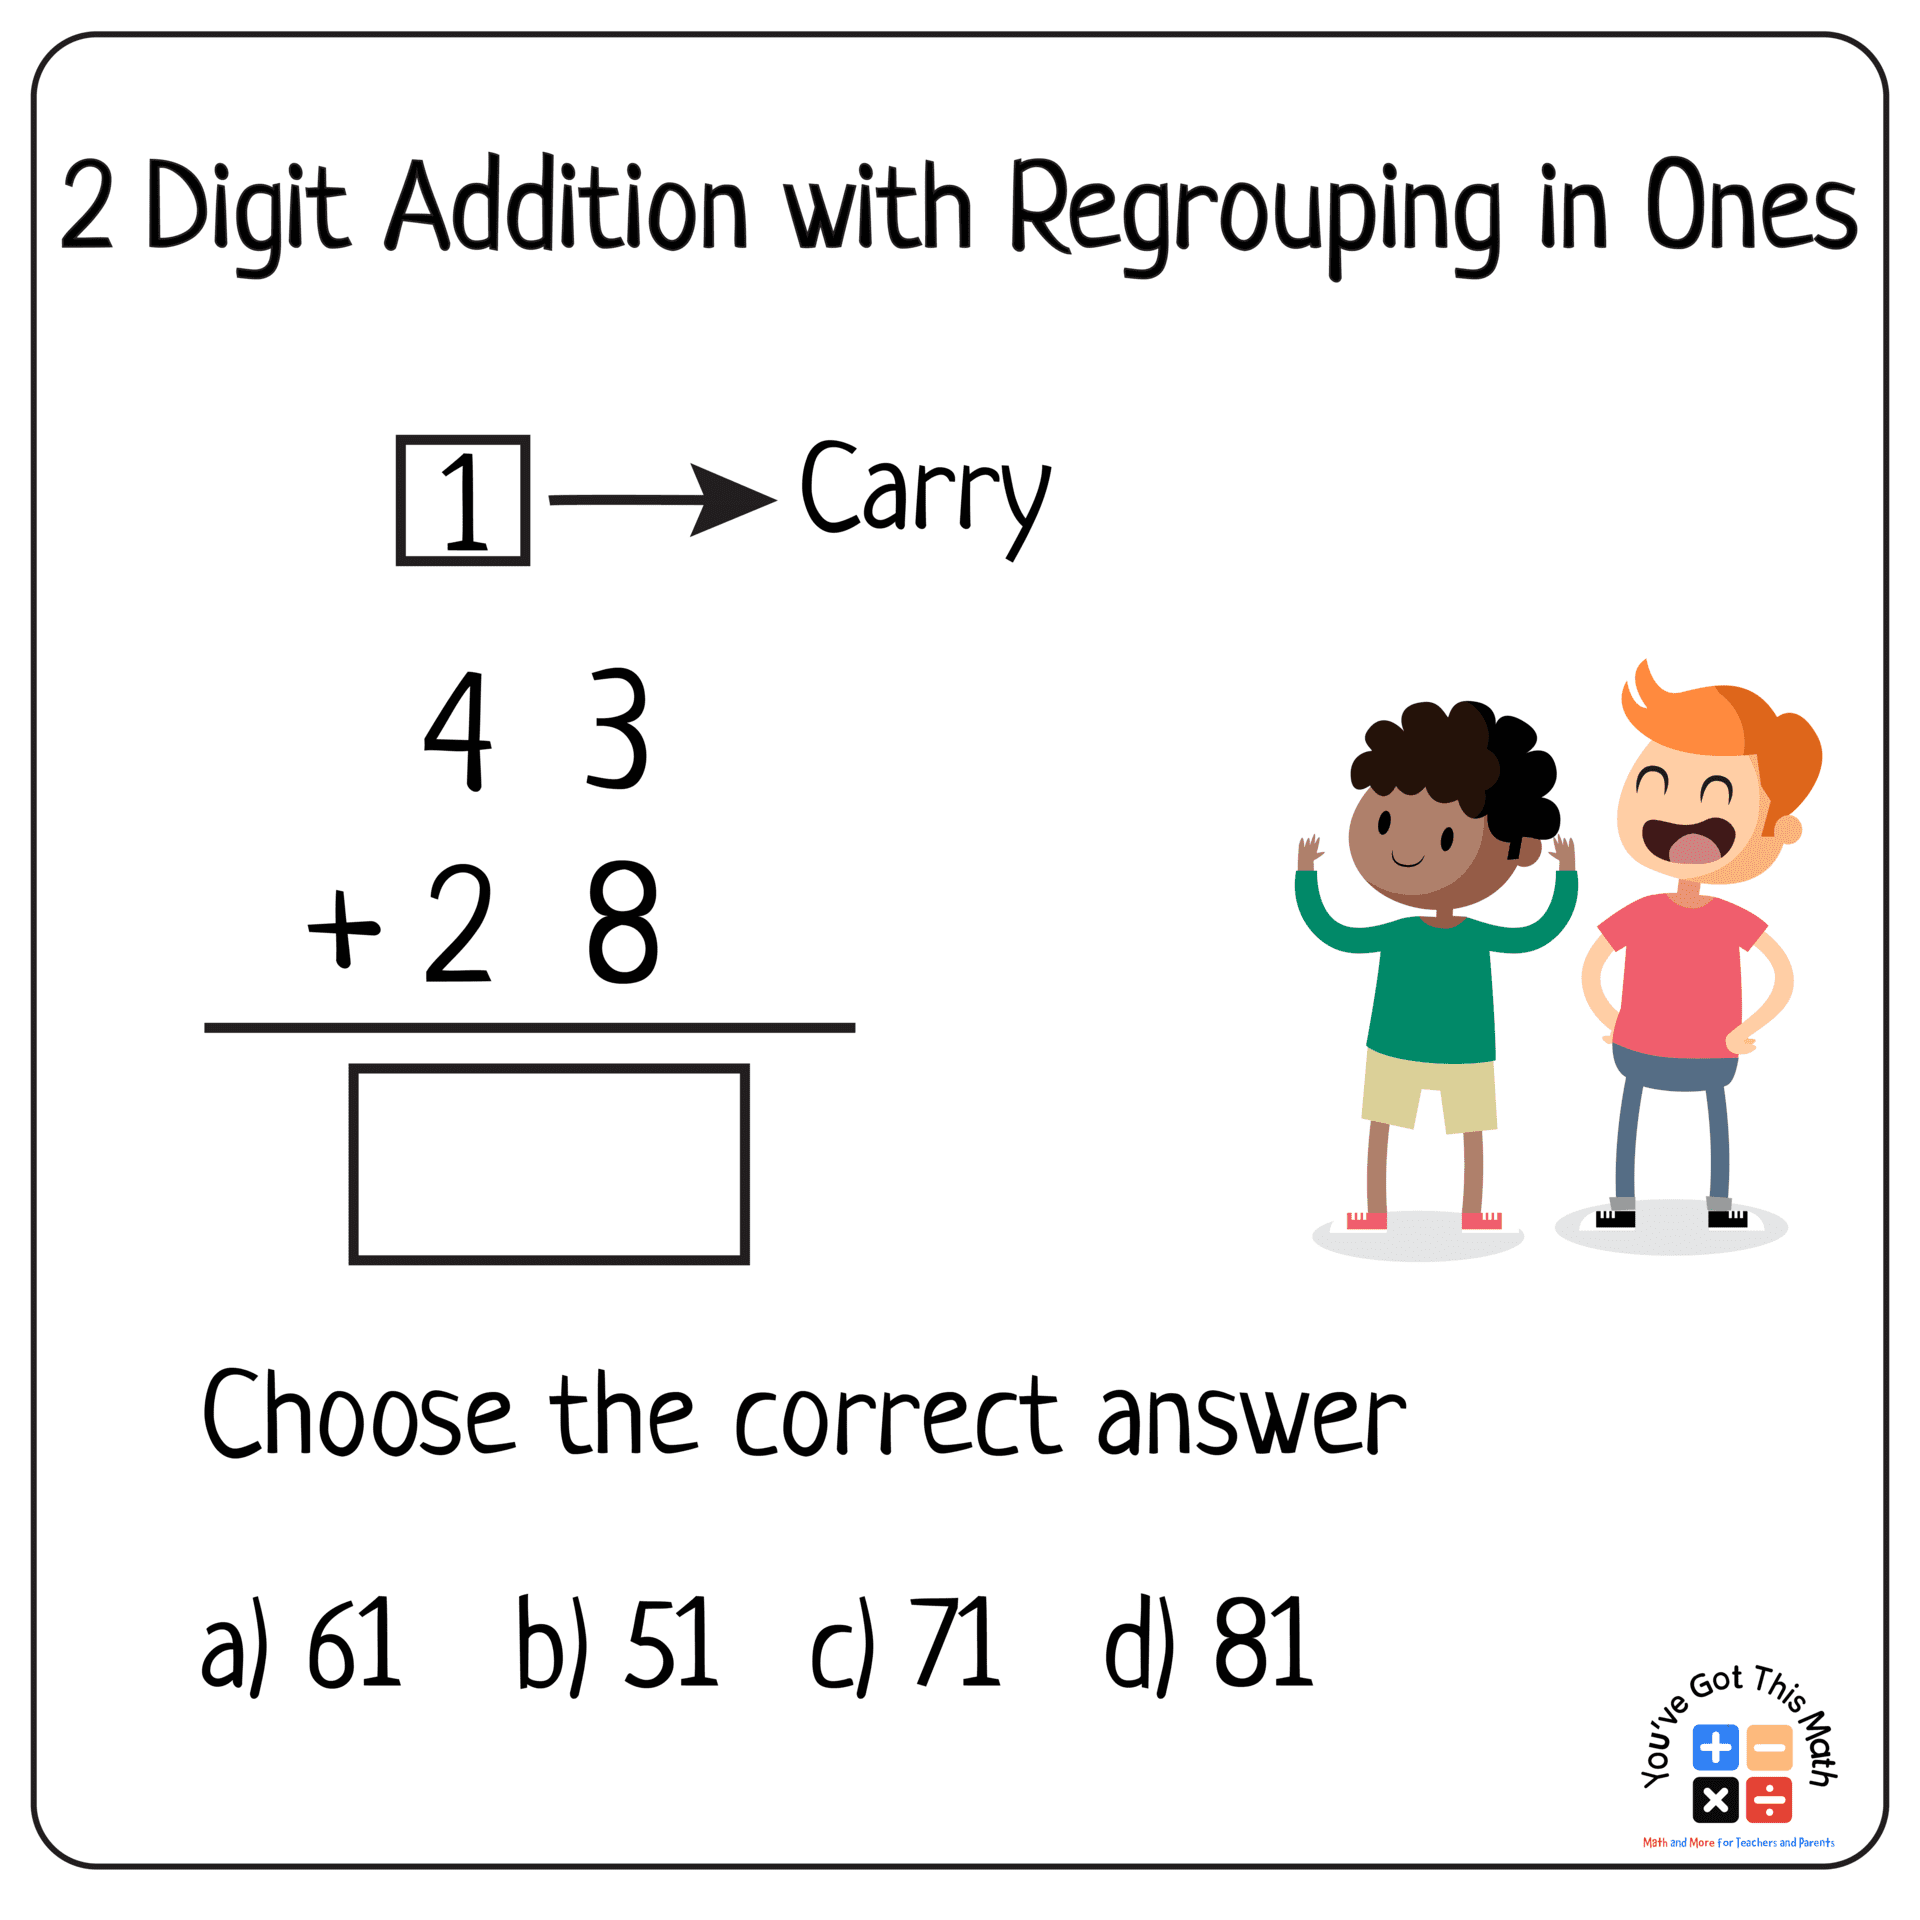 2 Digit Addition with Regrouping in Ones